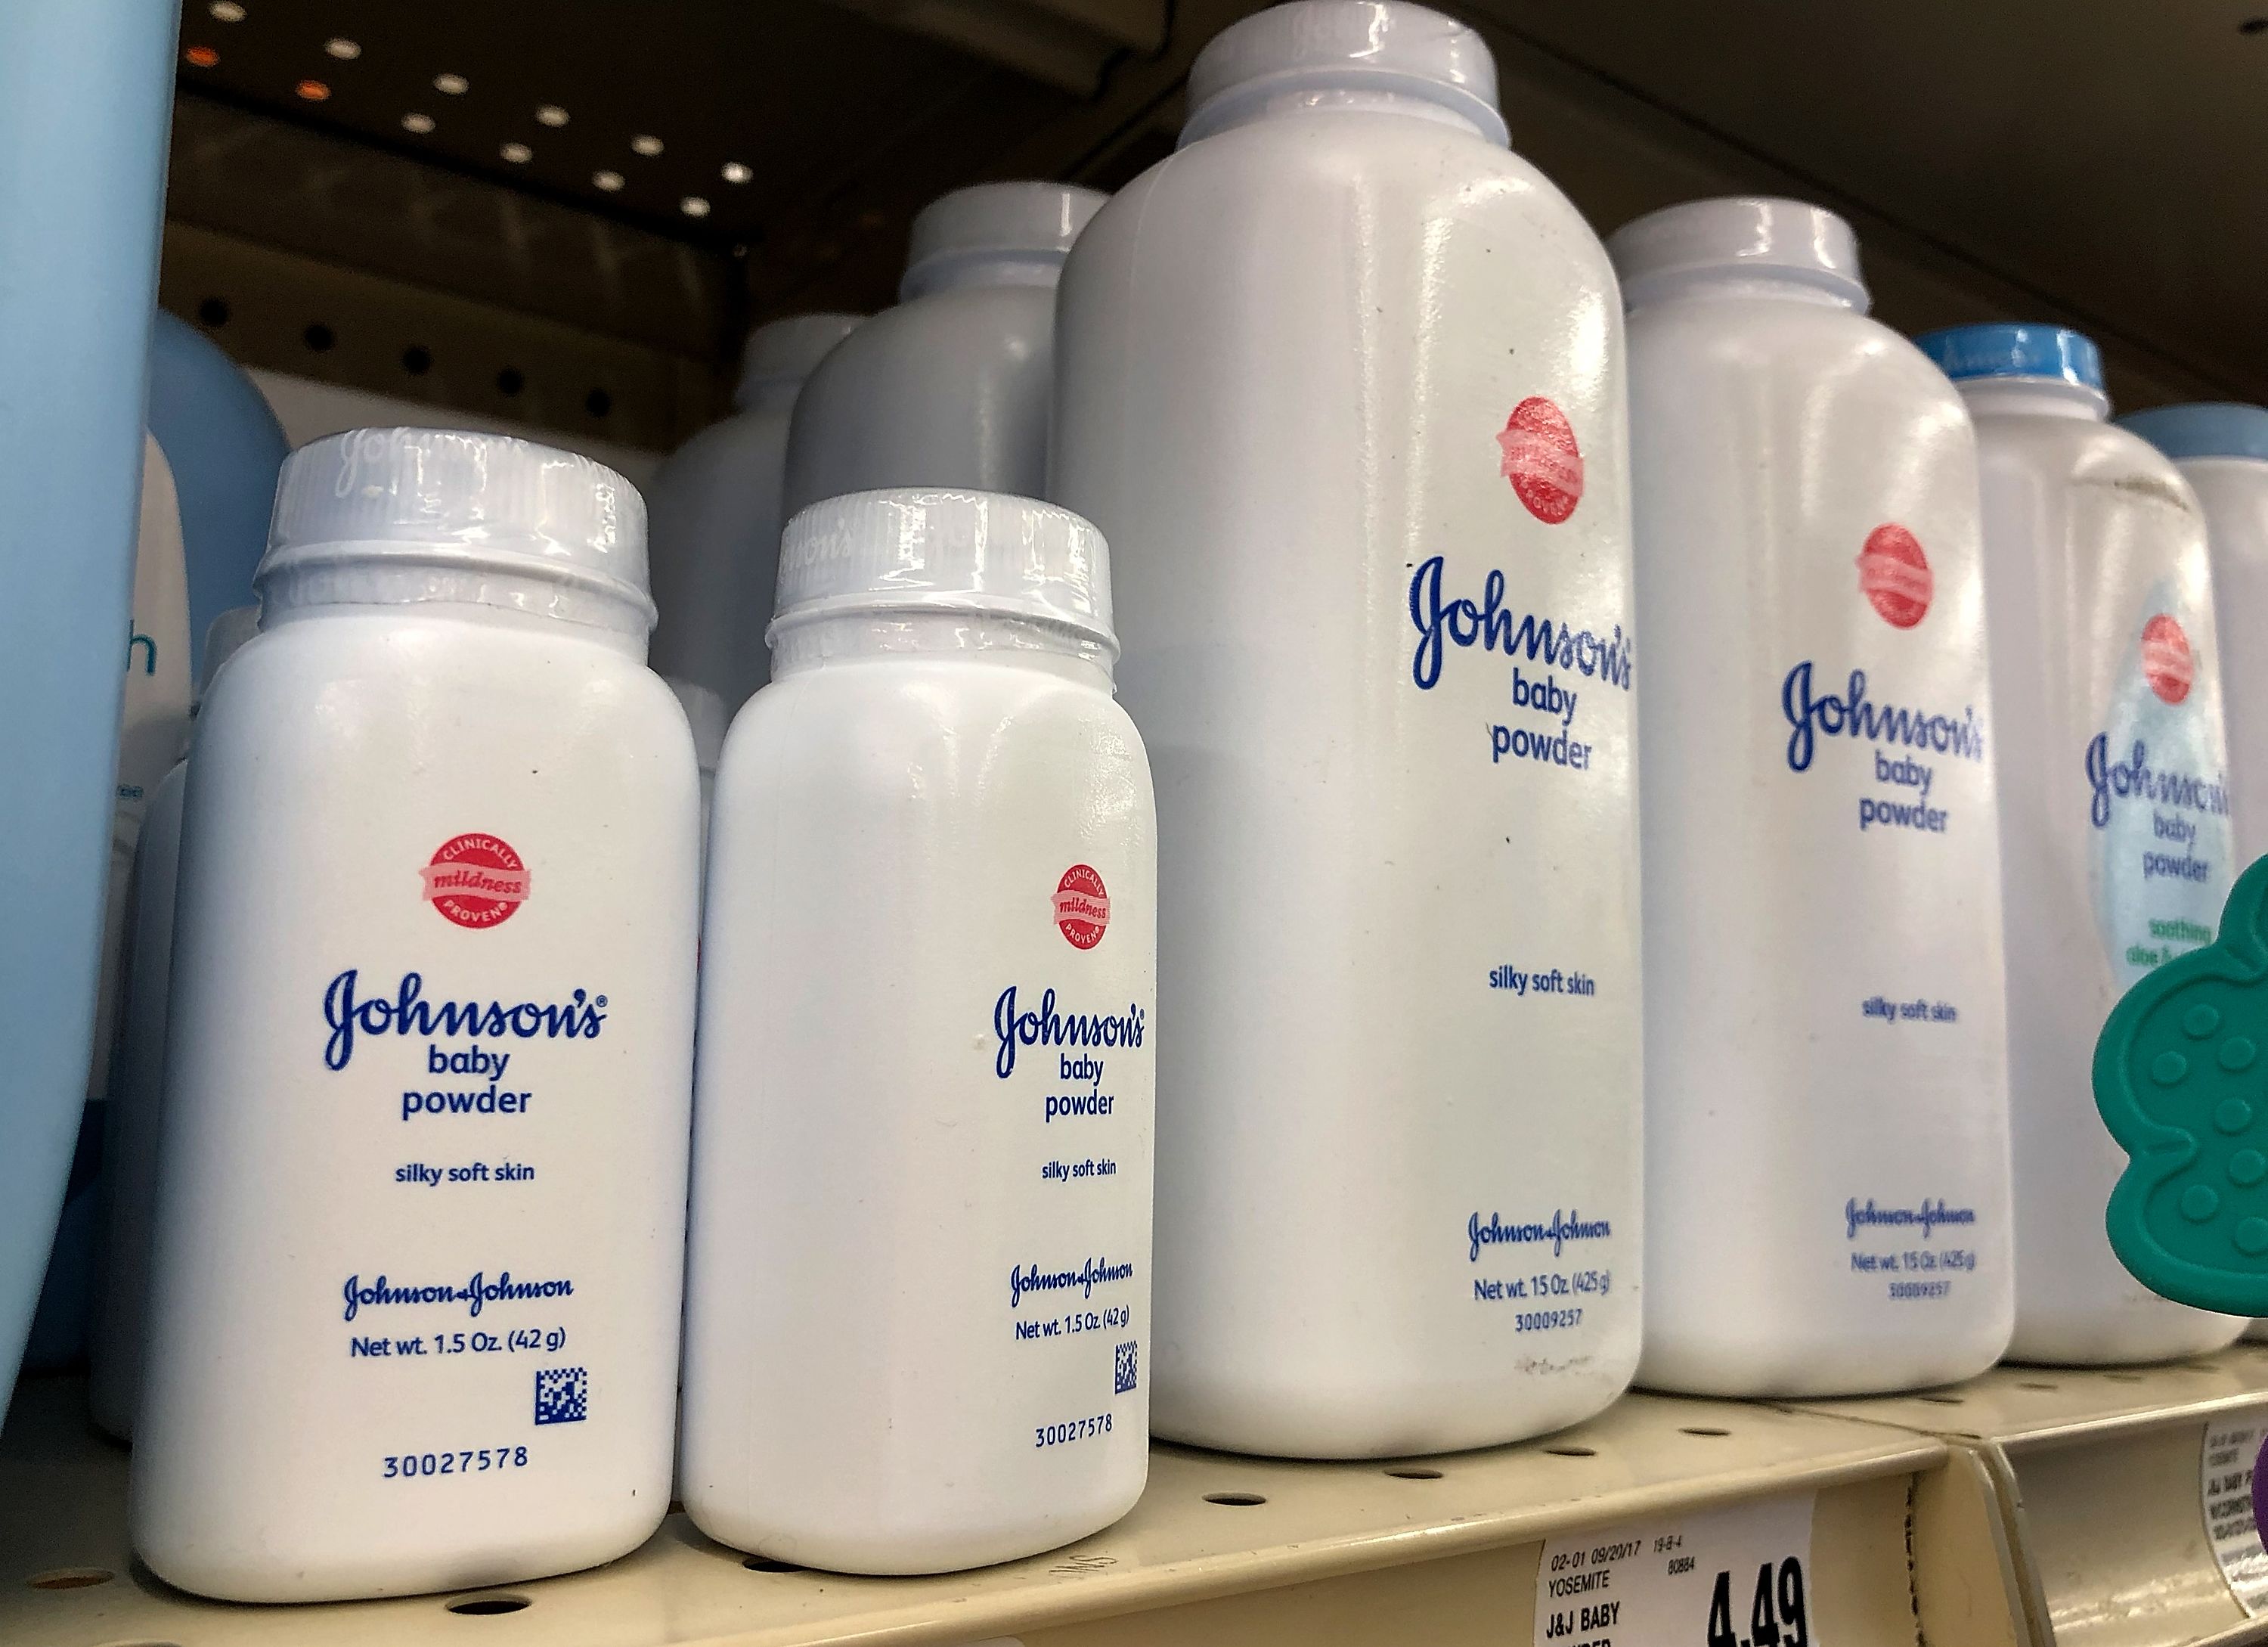 Judge denies J&J's request to transfer talc lawsuits to federal court